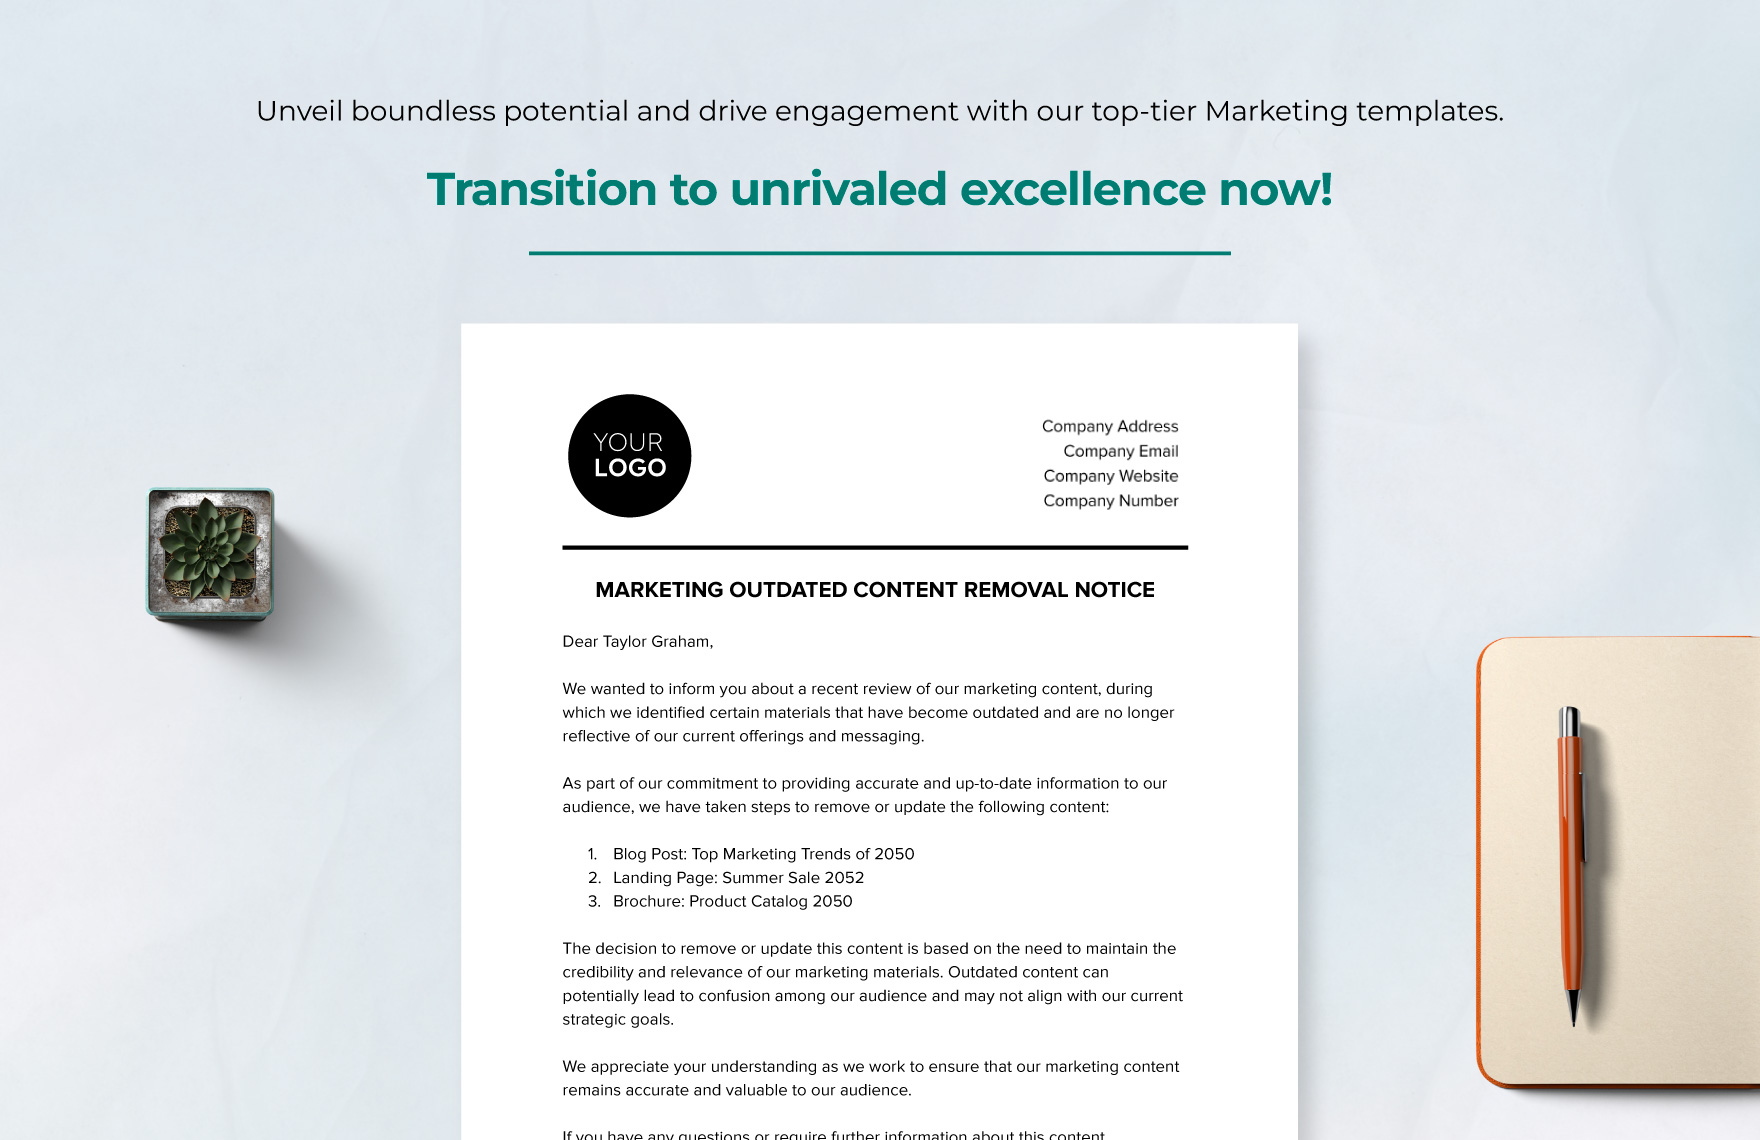 Marketing Outdated Content Removal Notice Template